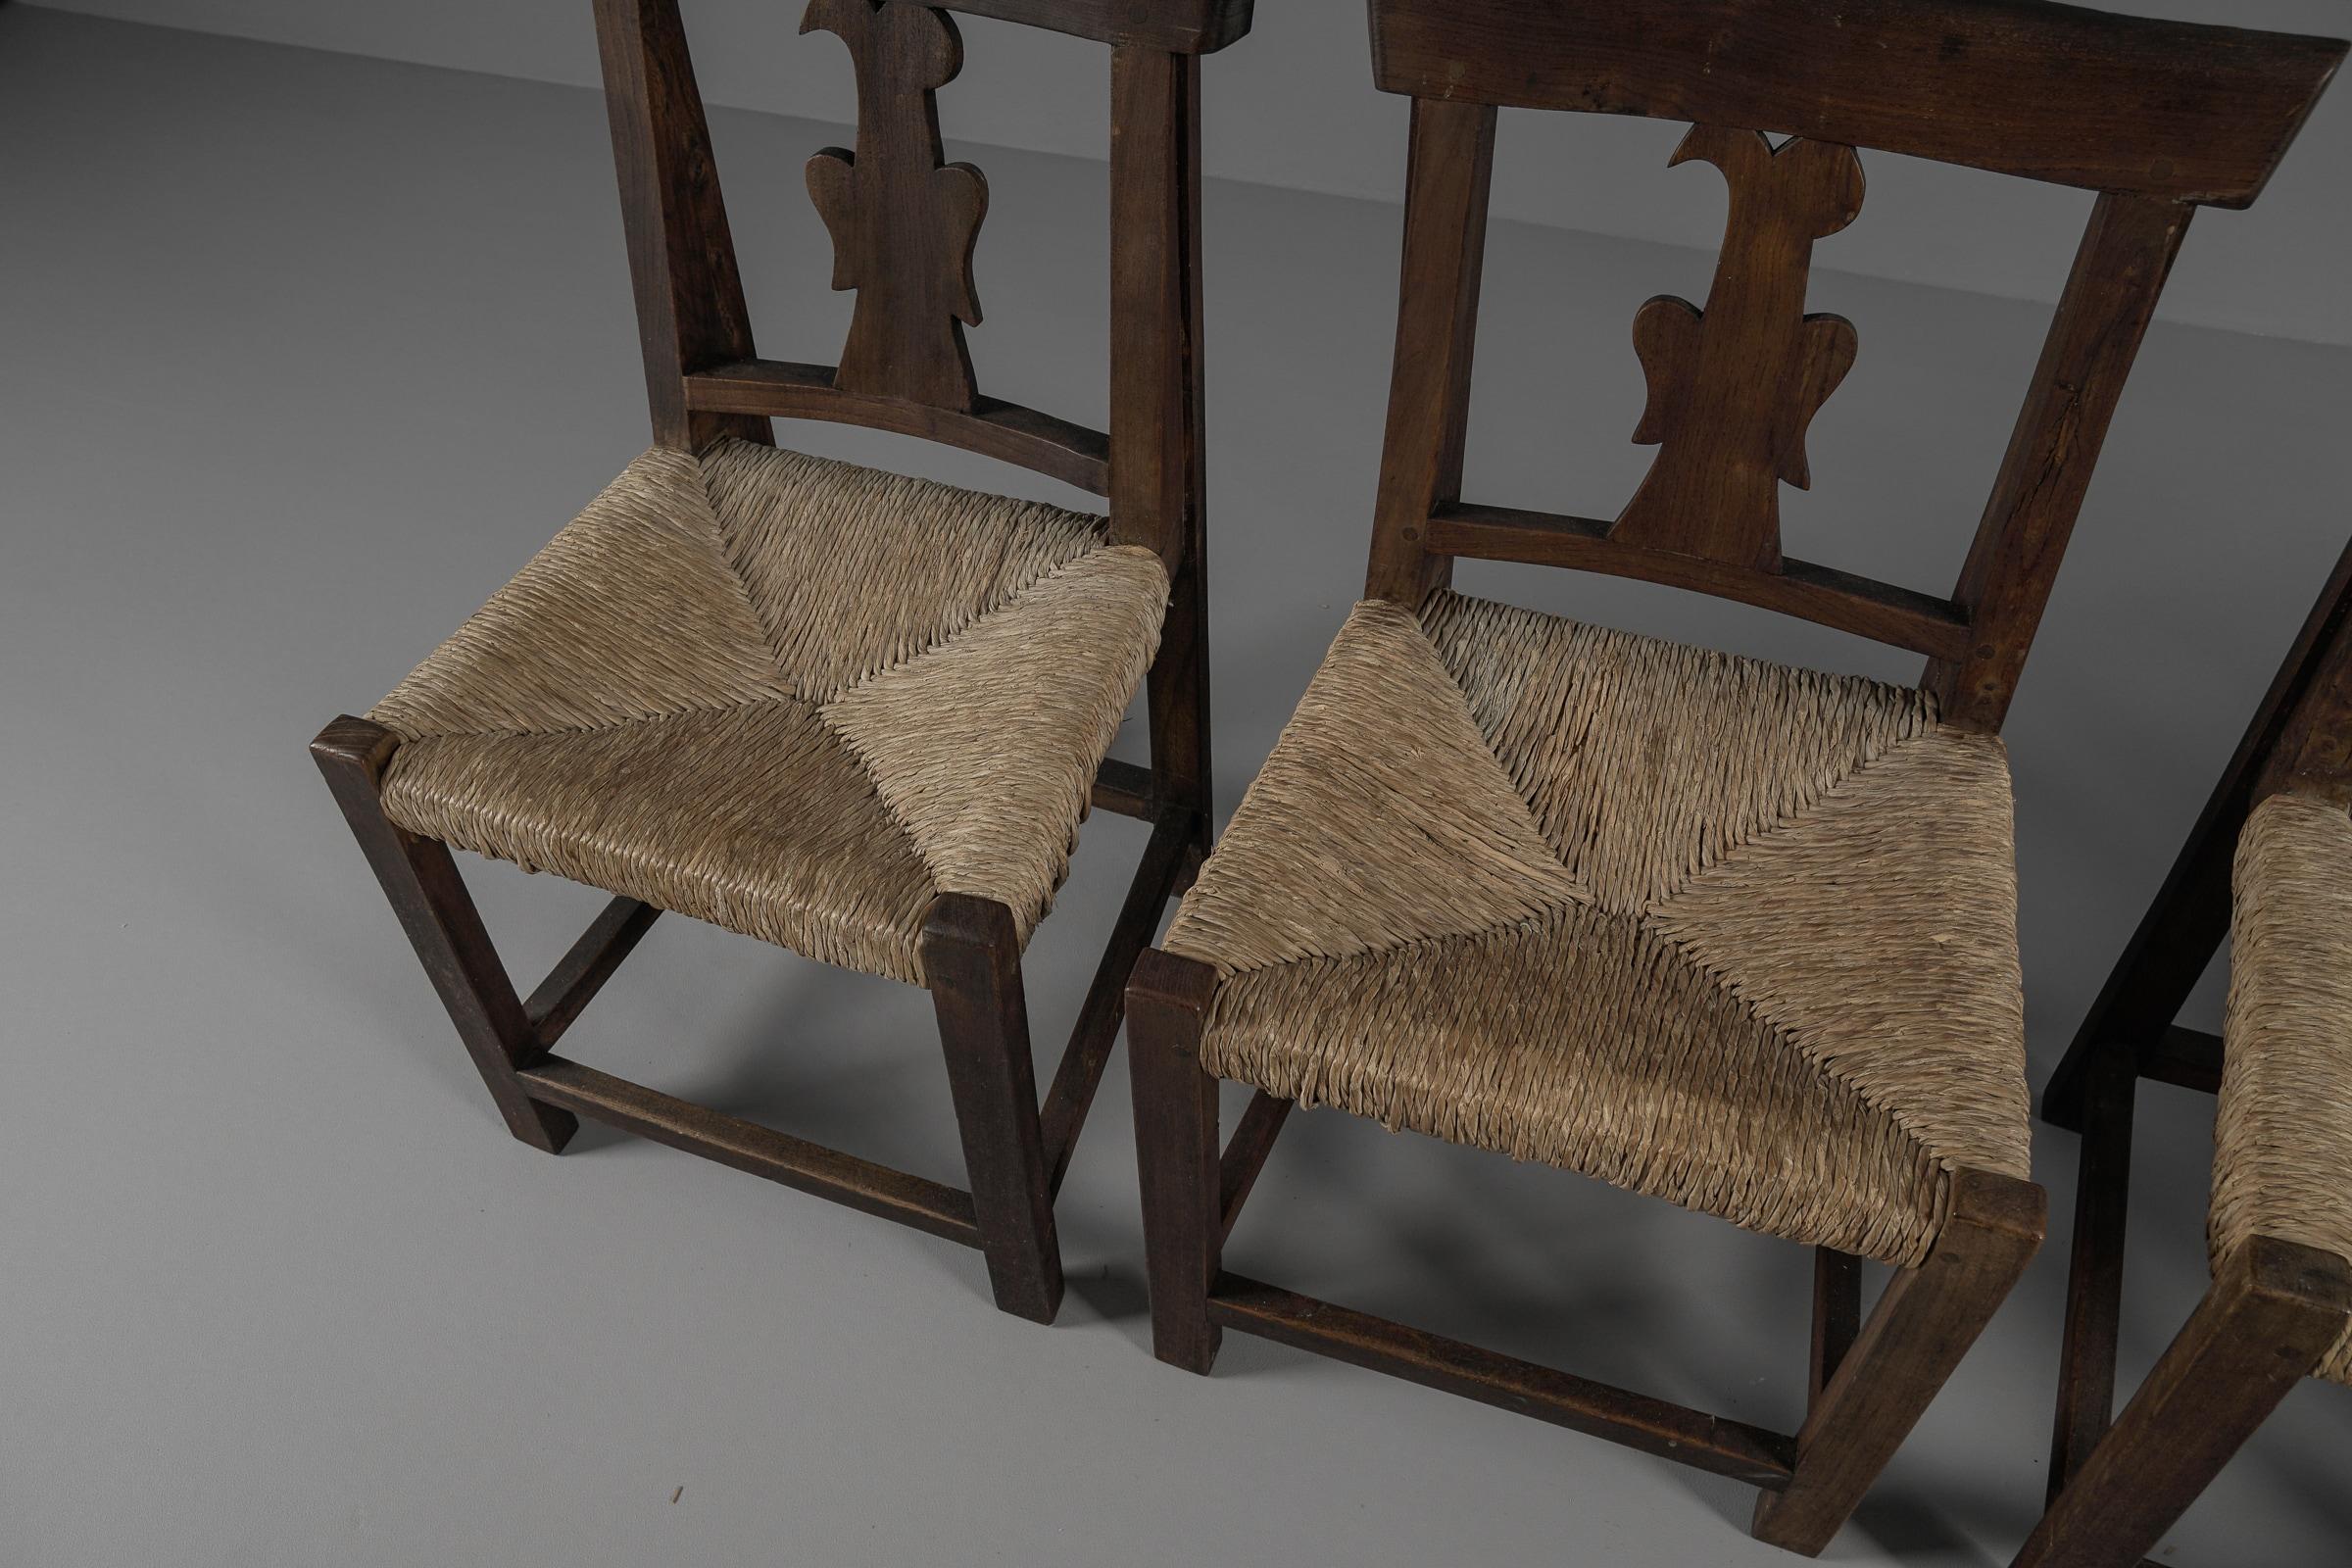 Set of 4 French Provincial Wood & Seagrass Chairs, 1960s Mid-Century Modern For Sale 12